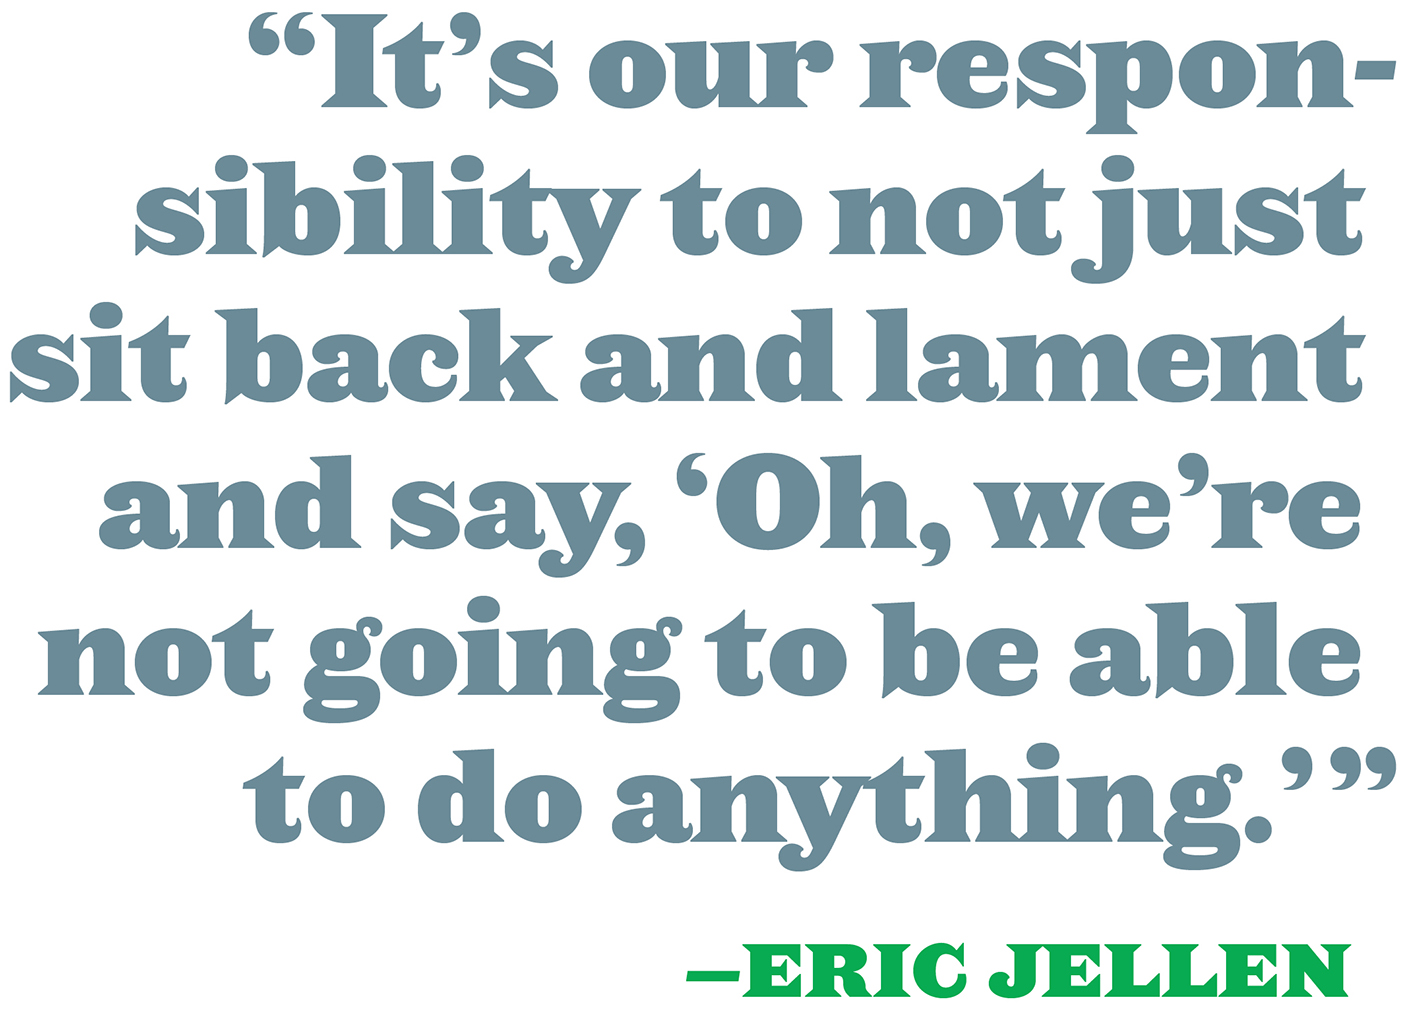 Pull quote by Eric Jellen. The text reads: "It's our responsibility to to not just sit back and lament and say, Oh, we're not going to be able to do anything.'"